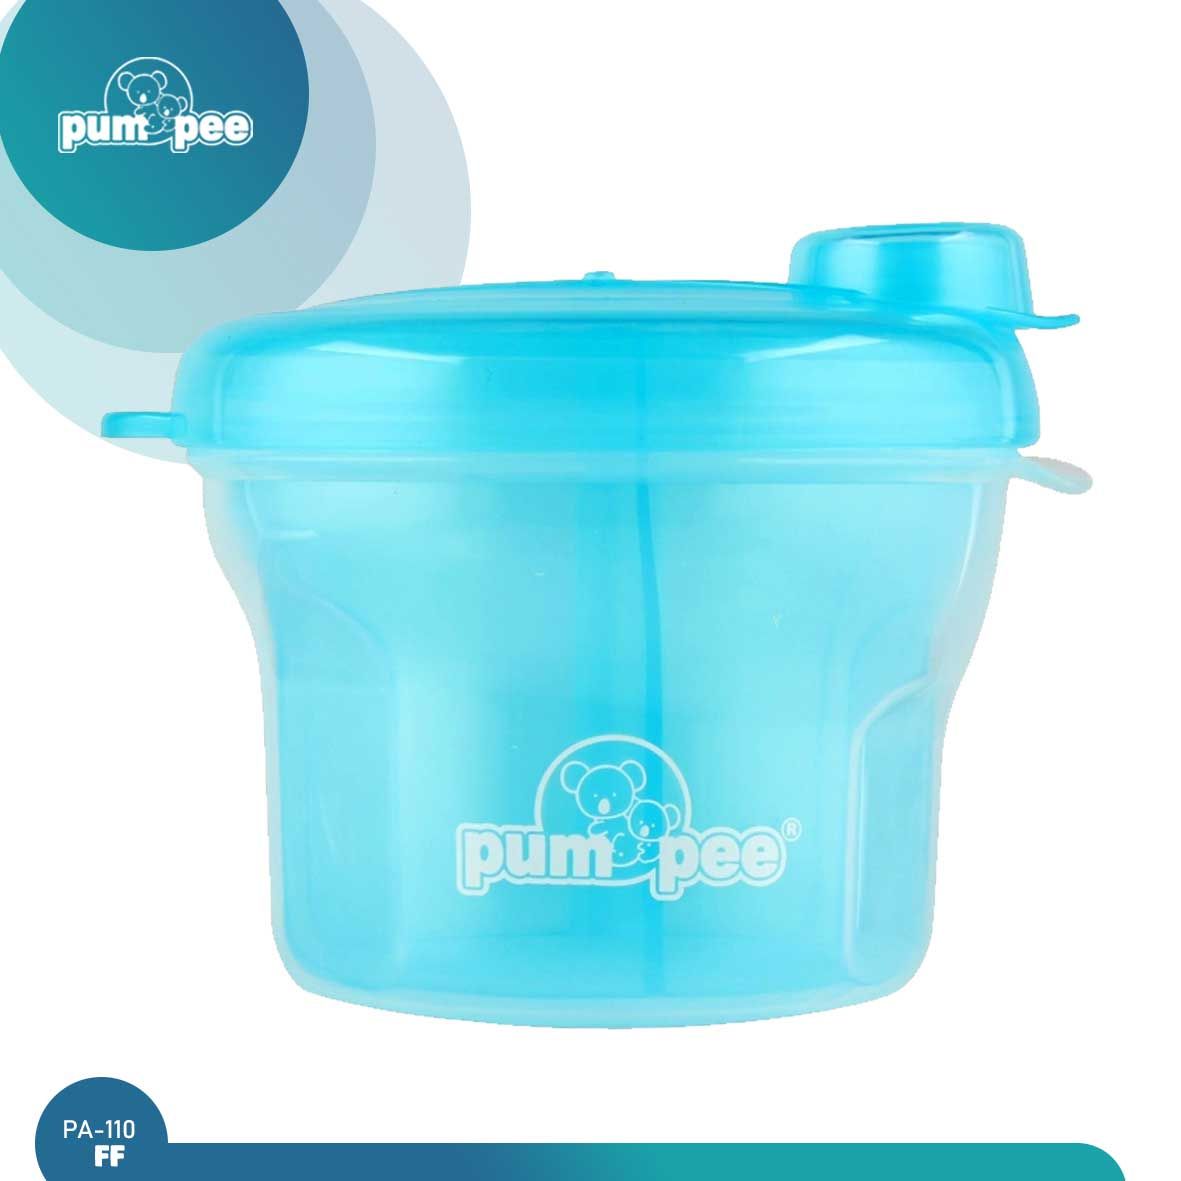 Pumpee Jumbo 3 Section Milk Container | PA-109MPB - 1